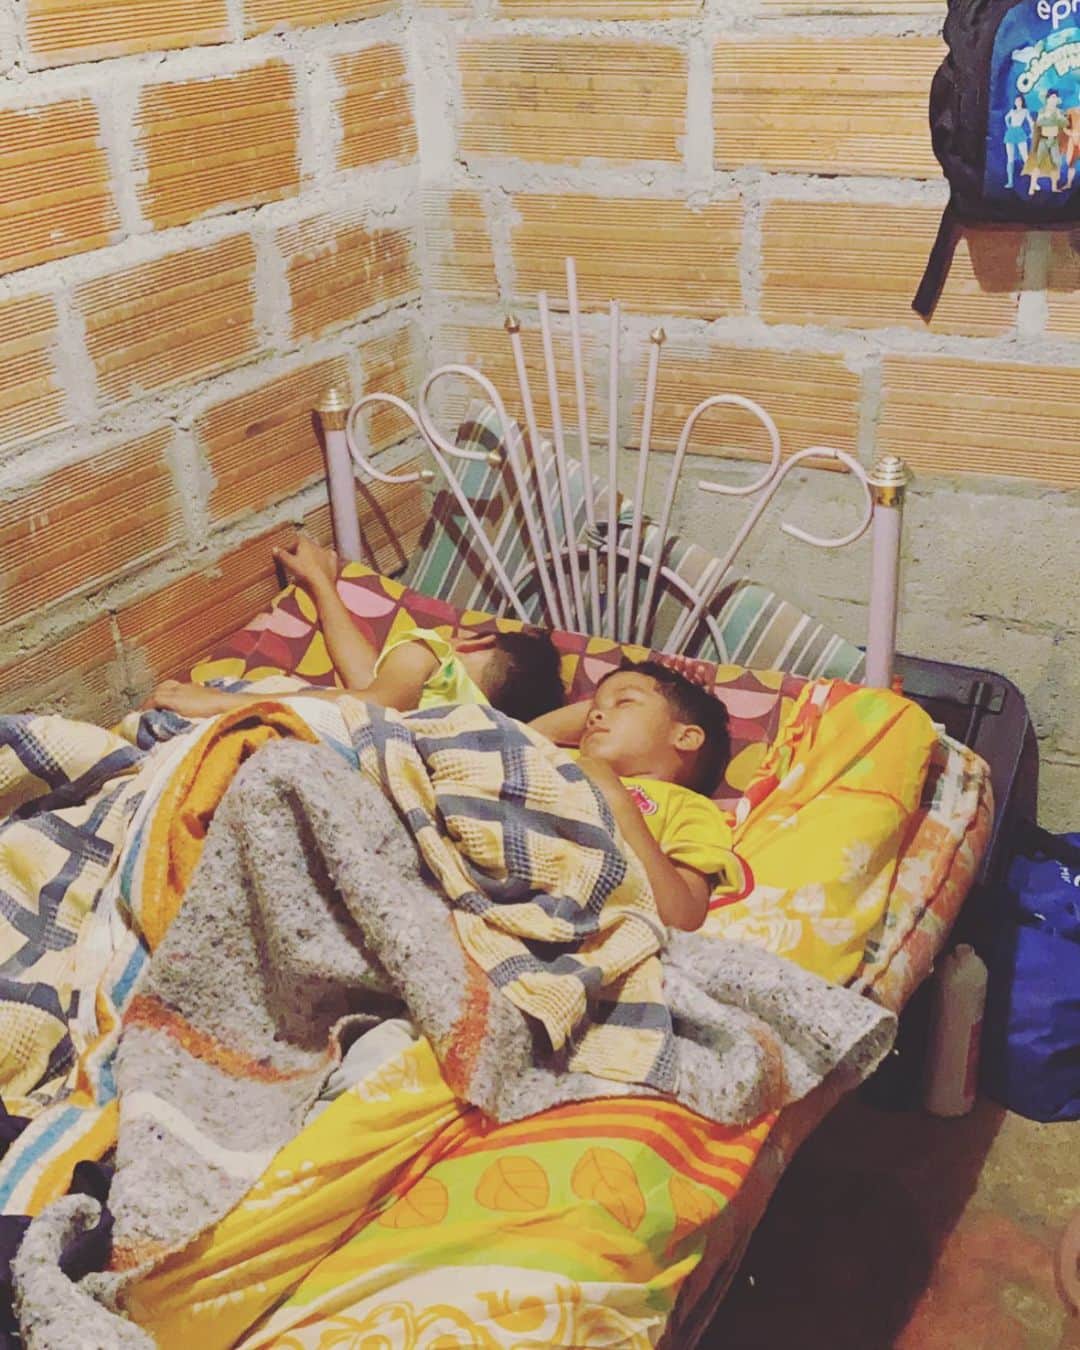 雅-MIYAVI-さんのインスタグラム写真 - (雅-MIYAVI-Instagram)「Brothers sleeping in one bed. Although we can’t post their parent’s pictures for several reasons, they all evacuated from their home because of some traumatizing events with leaving everything they had. They were woken up in the middle of the night by loud banging on their door. They knew if they answered the door, they’d all surely get shot down, so they quietly hid. Of course their children were terrified... What would I do if I were in the same situation? I’m sure I would go the same path they took to protect their family. 挤在一张床上睡着的孩子们。因为某些原因，我们无法放上他们父母的照片。他们经历了那些常人无法想象的困苦，才艰难决定放弃多年的累积，背井离乡至哥伦比亚避难。深夜睡梦中门外响起拍门的声音，他们知道一旦发出一丝声音就会被扫射，在危险中害怕得瑟瑟发抖的孩子们。如果发生在我身上我会怎么办呢？或许也会做出和他们一样的决定吧。 一つのベッドを分け合って眠る子供たち。訳あってお父さんお母さんの写真は載せることはできませんが、彼らは想像を絶する日々を経て、築いてきたもの全部捨てる決断をした上で、コロンビアへ避難してきました。真夜中、寝ている最中にドアを叩く音、声を出せばそこに向かって打たれる危険性、怯える小さな子供たち。僕ならどうするだろう？おそらく同じような決断をすると思う。#UNHCR #EveryDreamCounts」1月25日 20時15分 - miyavi_ishihara